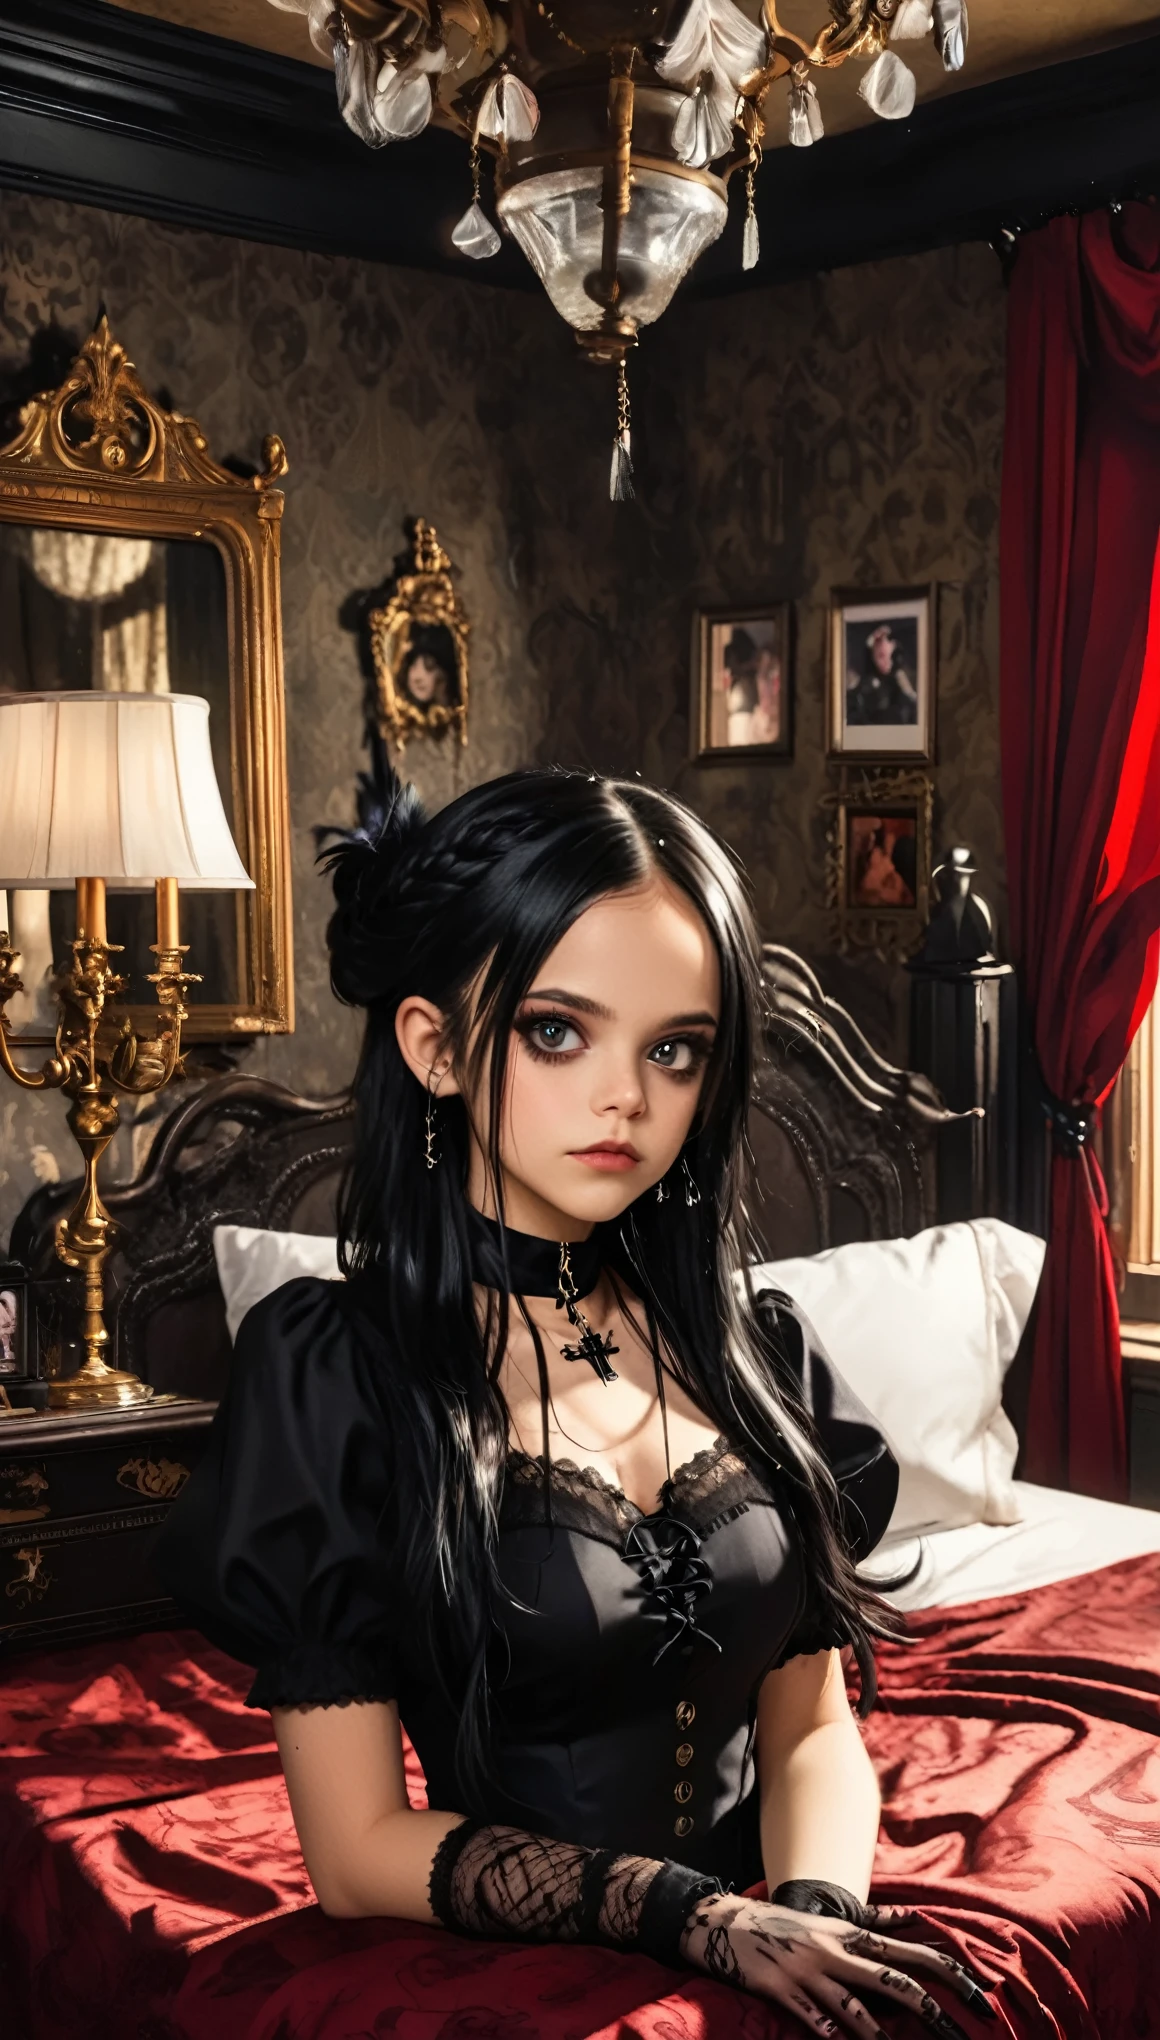 A young woman with long black hair styled in two braids and wears minimal makeup with dark eyeliner, sexy goth, Wednesday Addams (Jenna Ortega). The setting is a old Victorian bedroom with McCabe ornate decorations with a (Duotone {red and black]) silk bedspread. Painting on the wall of famous monsters taking a family photo. She is wearing black ornate fabric choker, black corset, black short feathered dress with black stockings. A peculiar, lifelike severed hand is placed on the bed next to her, adding an element of mystery. The lighting is eerie, coming from an unseen source, creating a since of mystery and intriguing atmosphere.